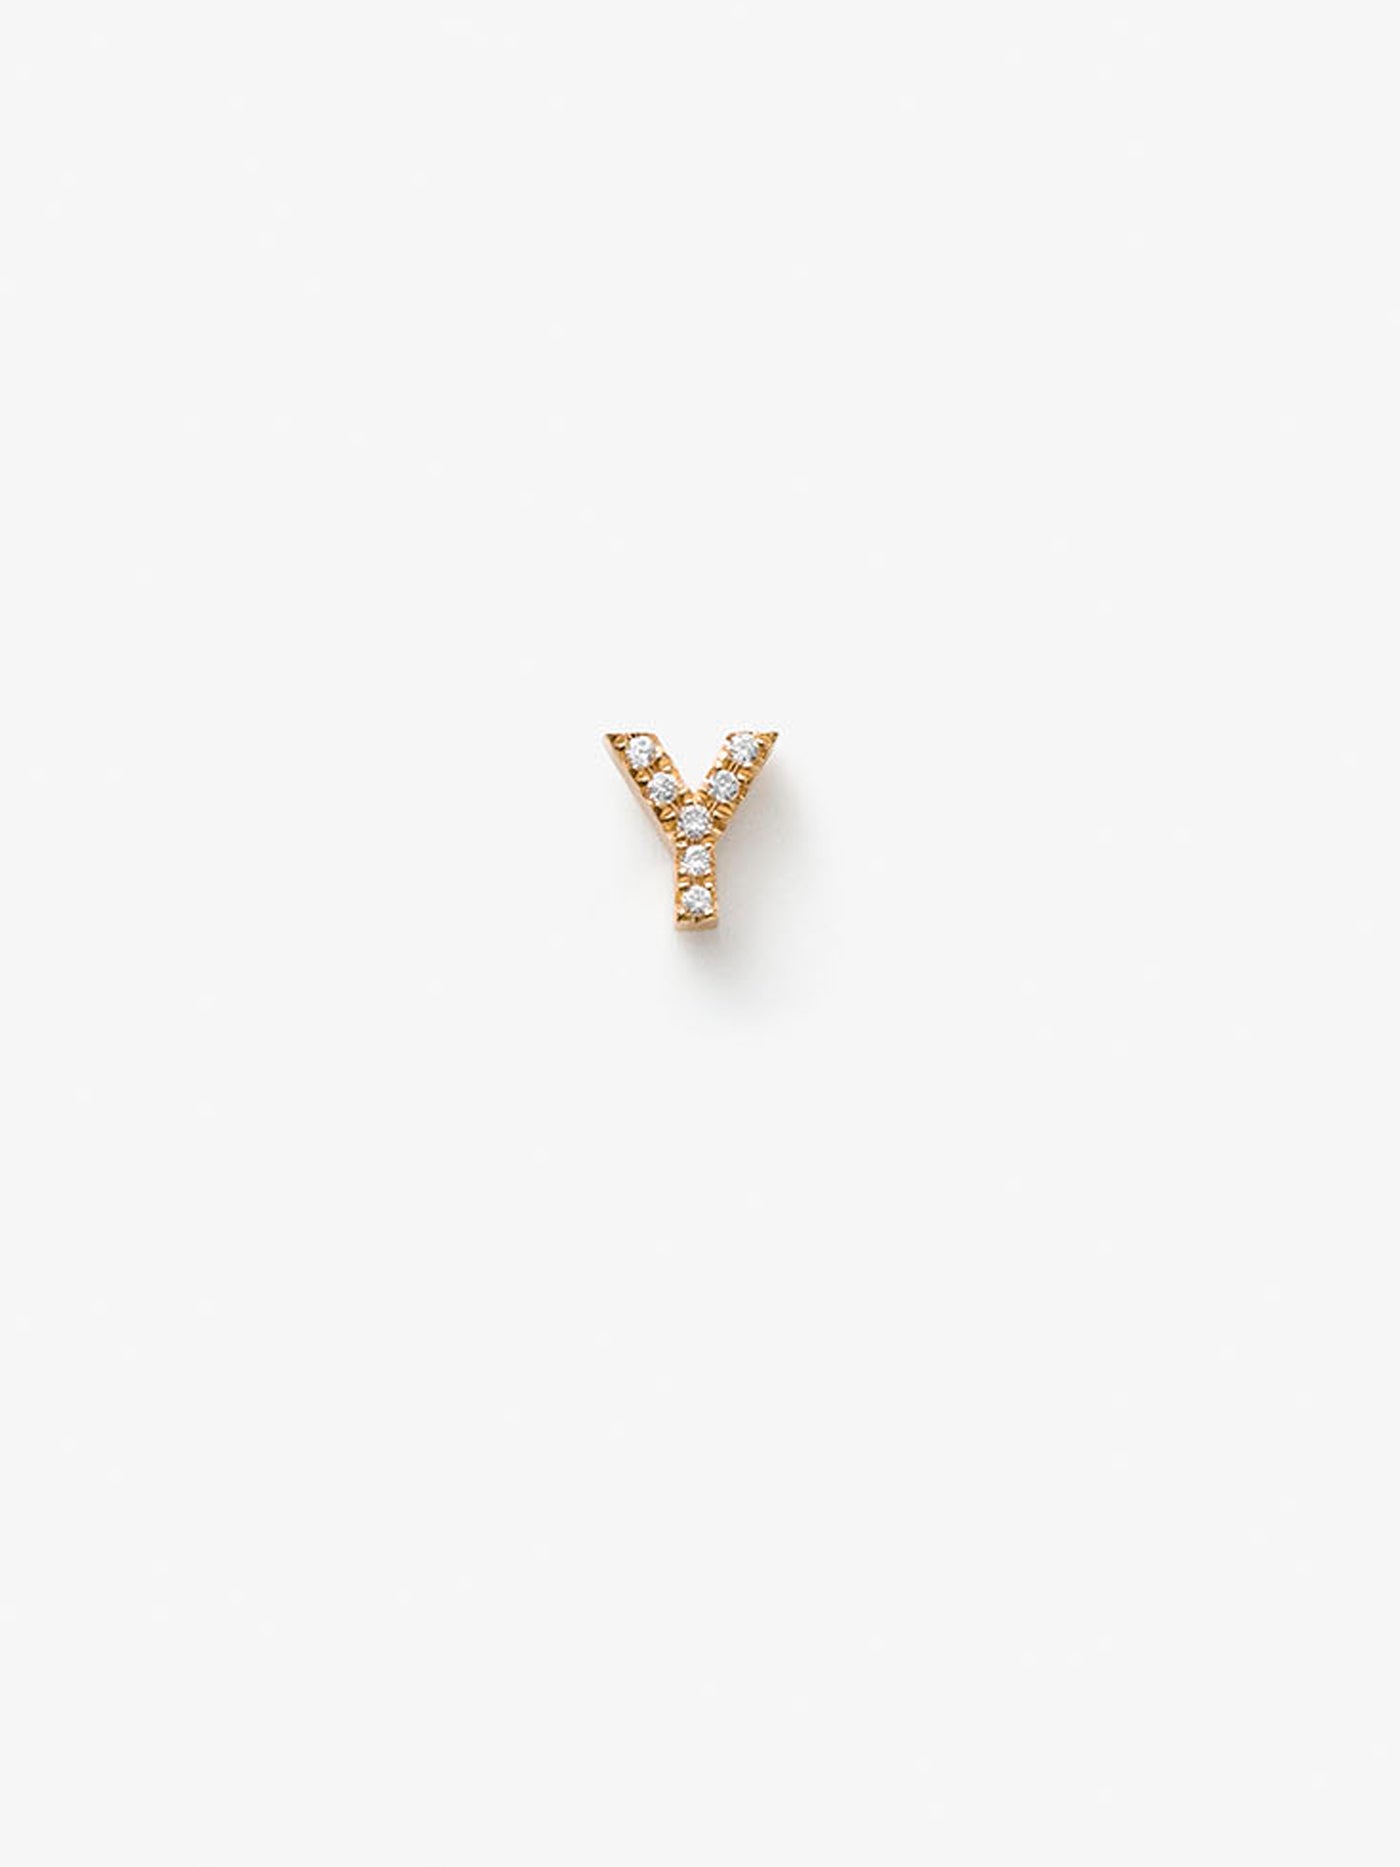 One Letter Y in Diamonds and 18k Gold